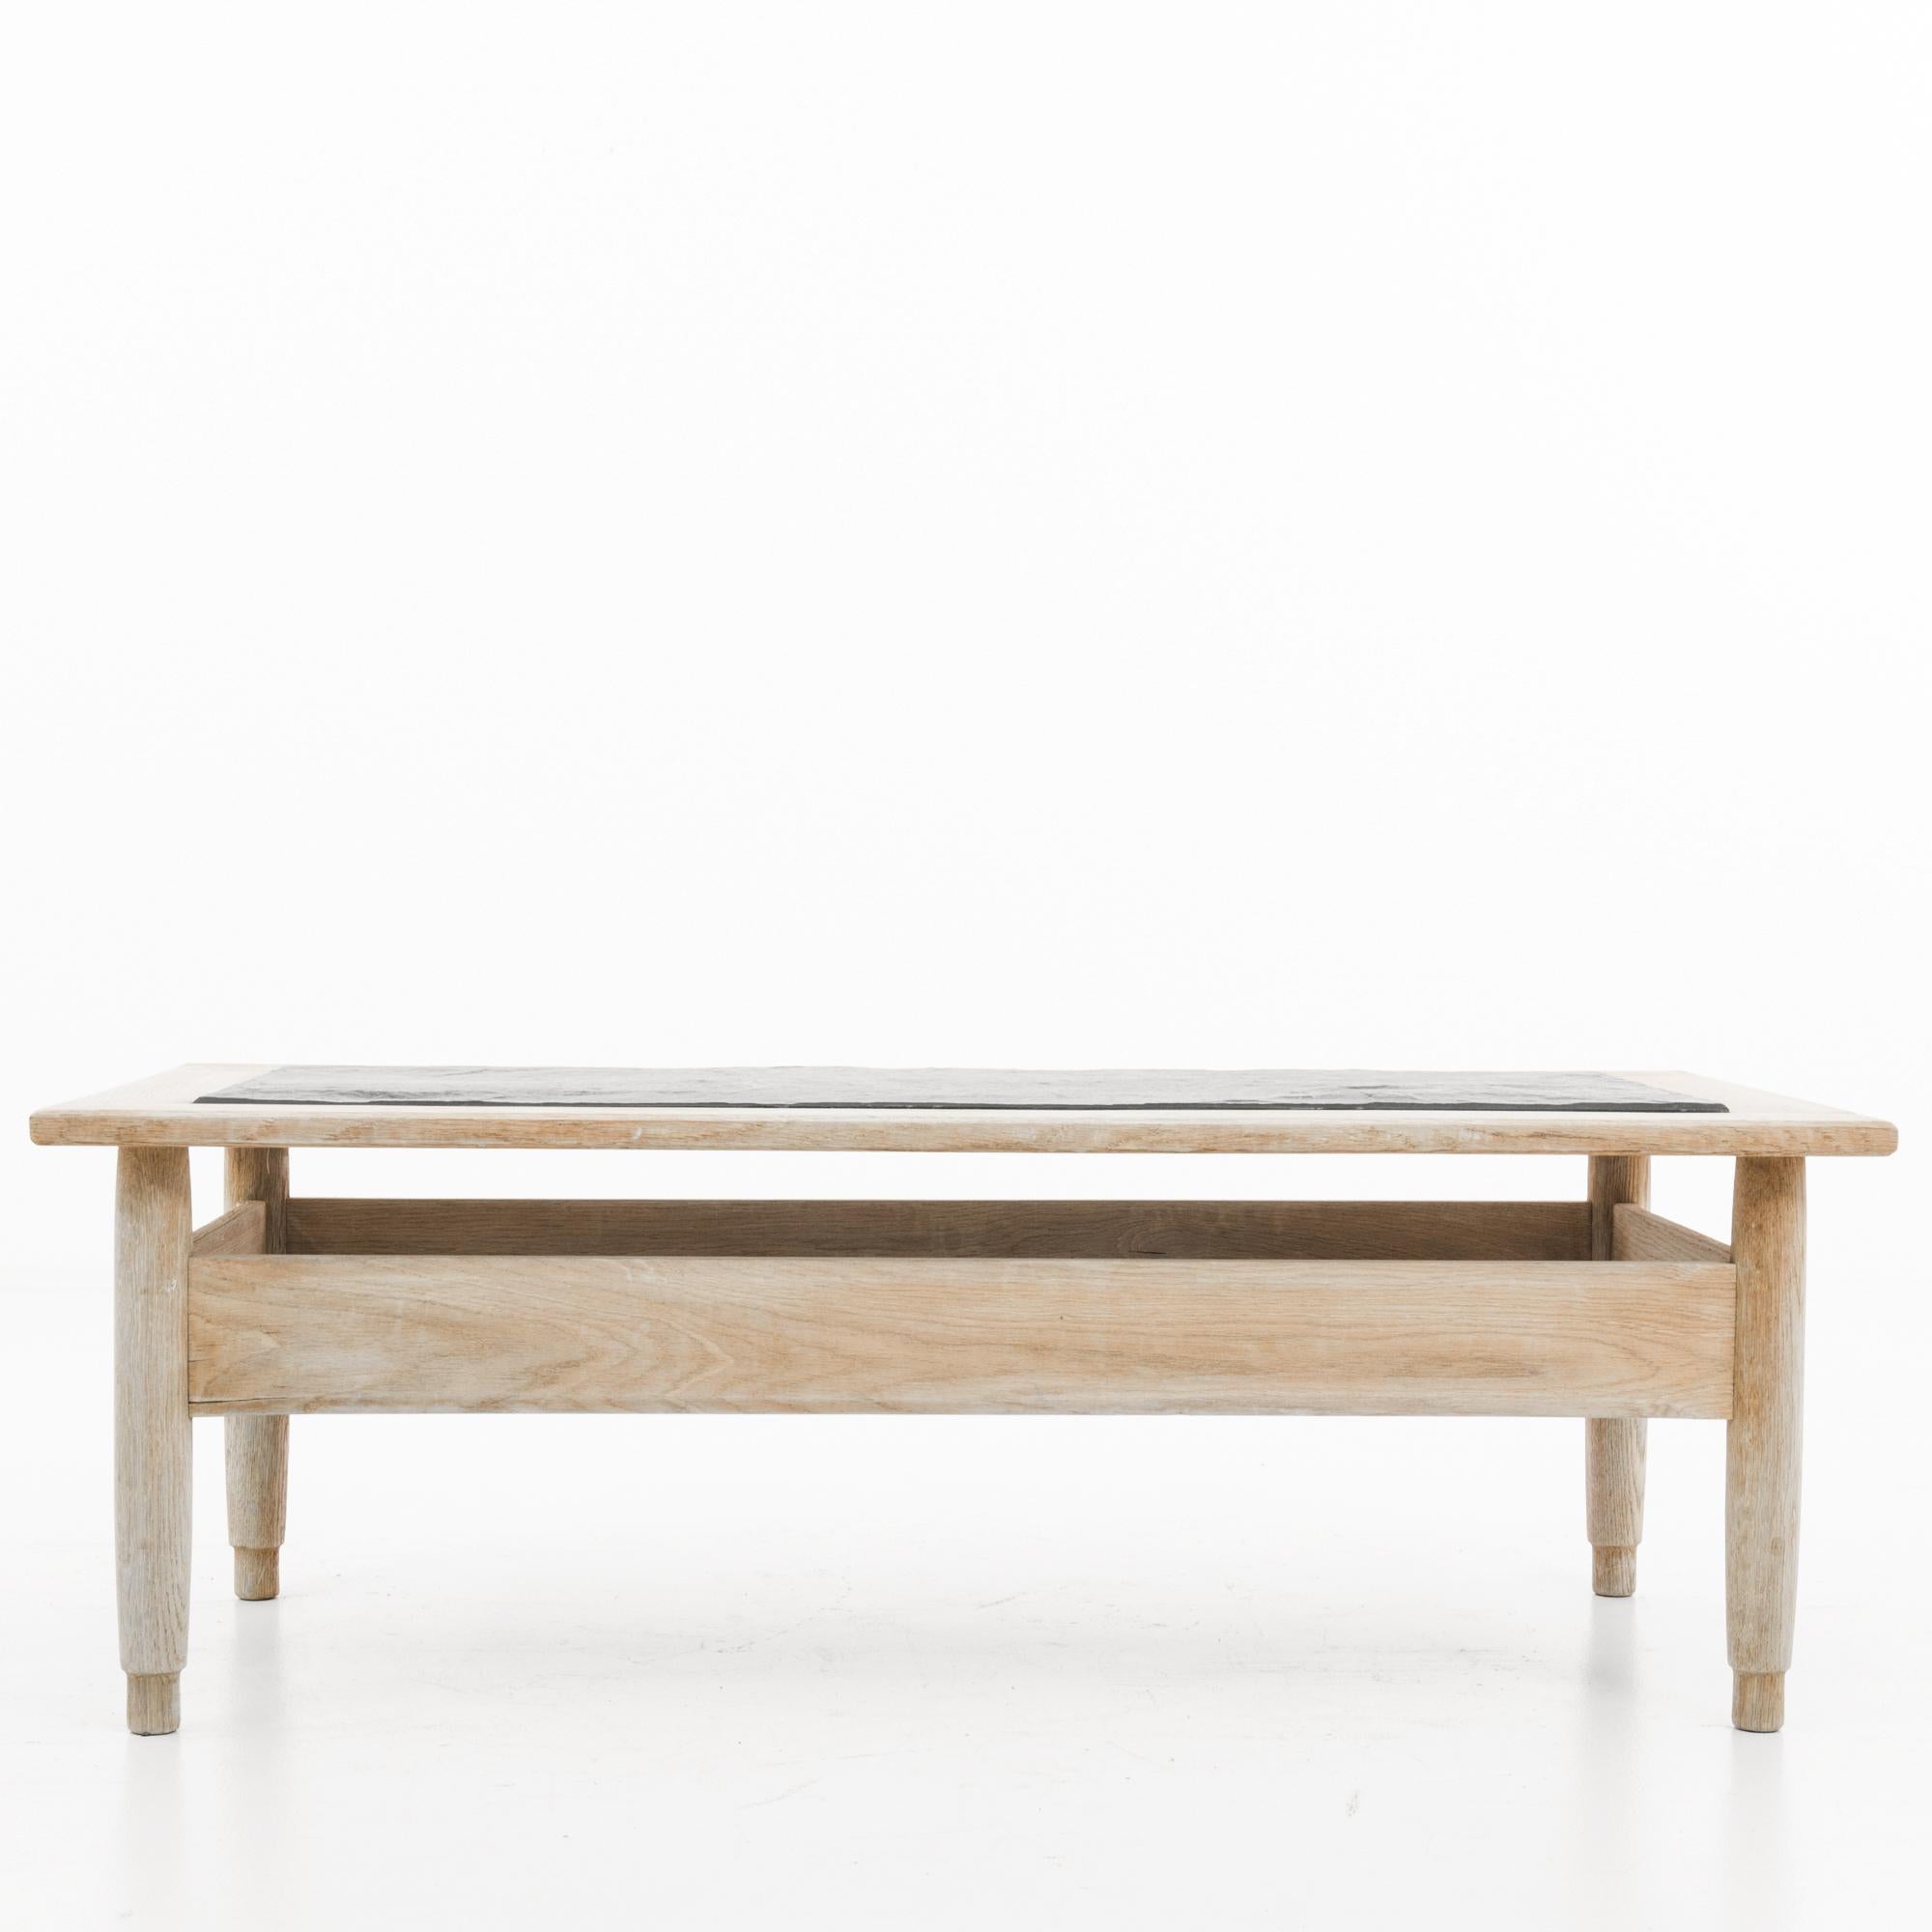 A bleached oak table with stone top produced in France in the 1960s. Low-slung coffee table in the rustic vein of the mid-century modern with its simple silhouette, wide stretchers, and organic feeling bevel as legs turn to feet. The black stone